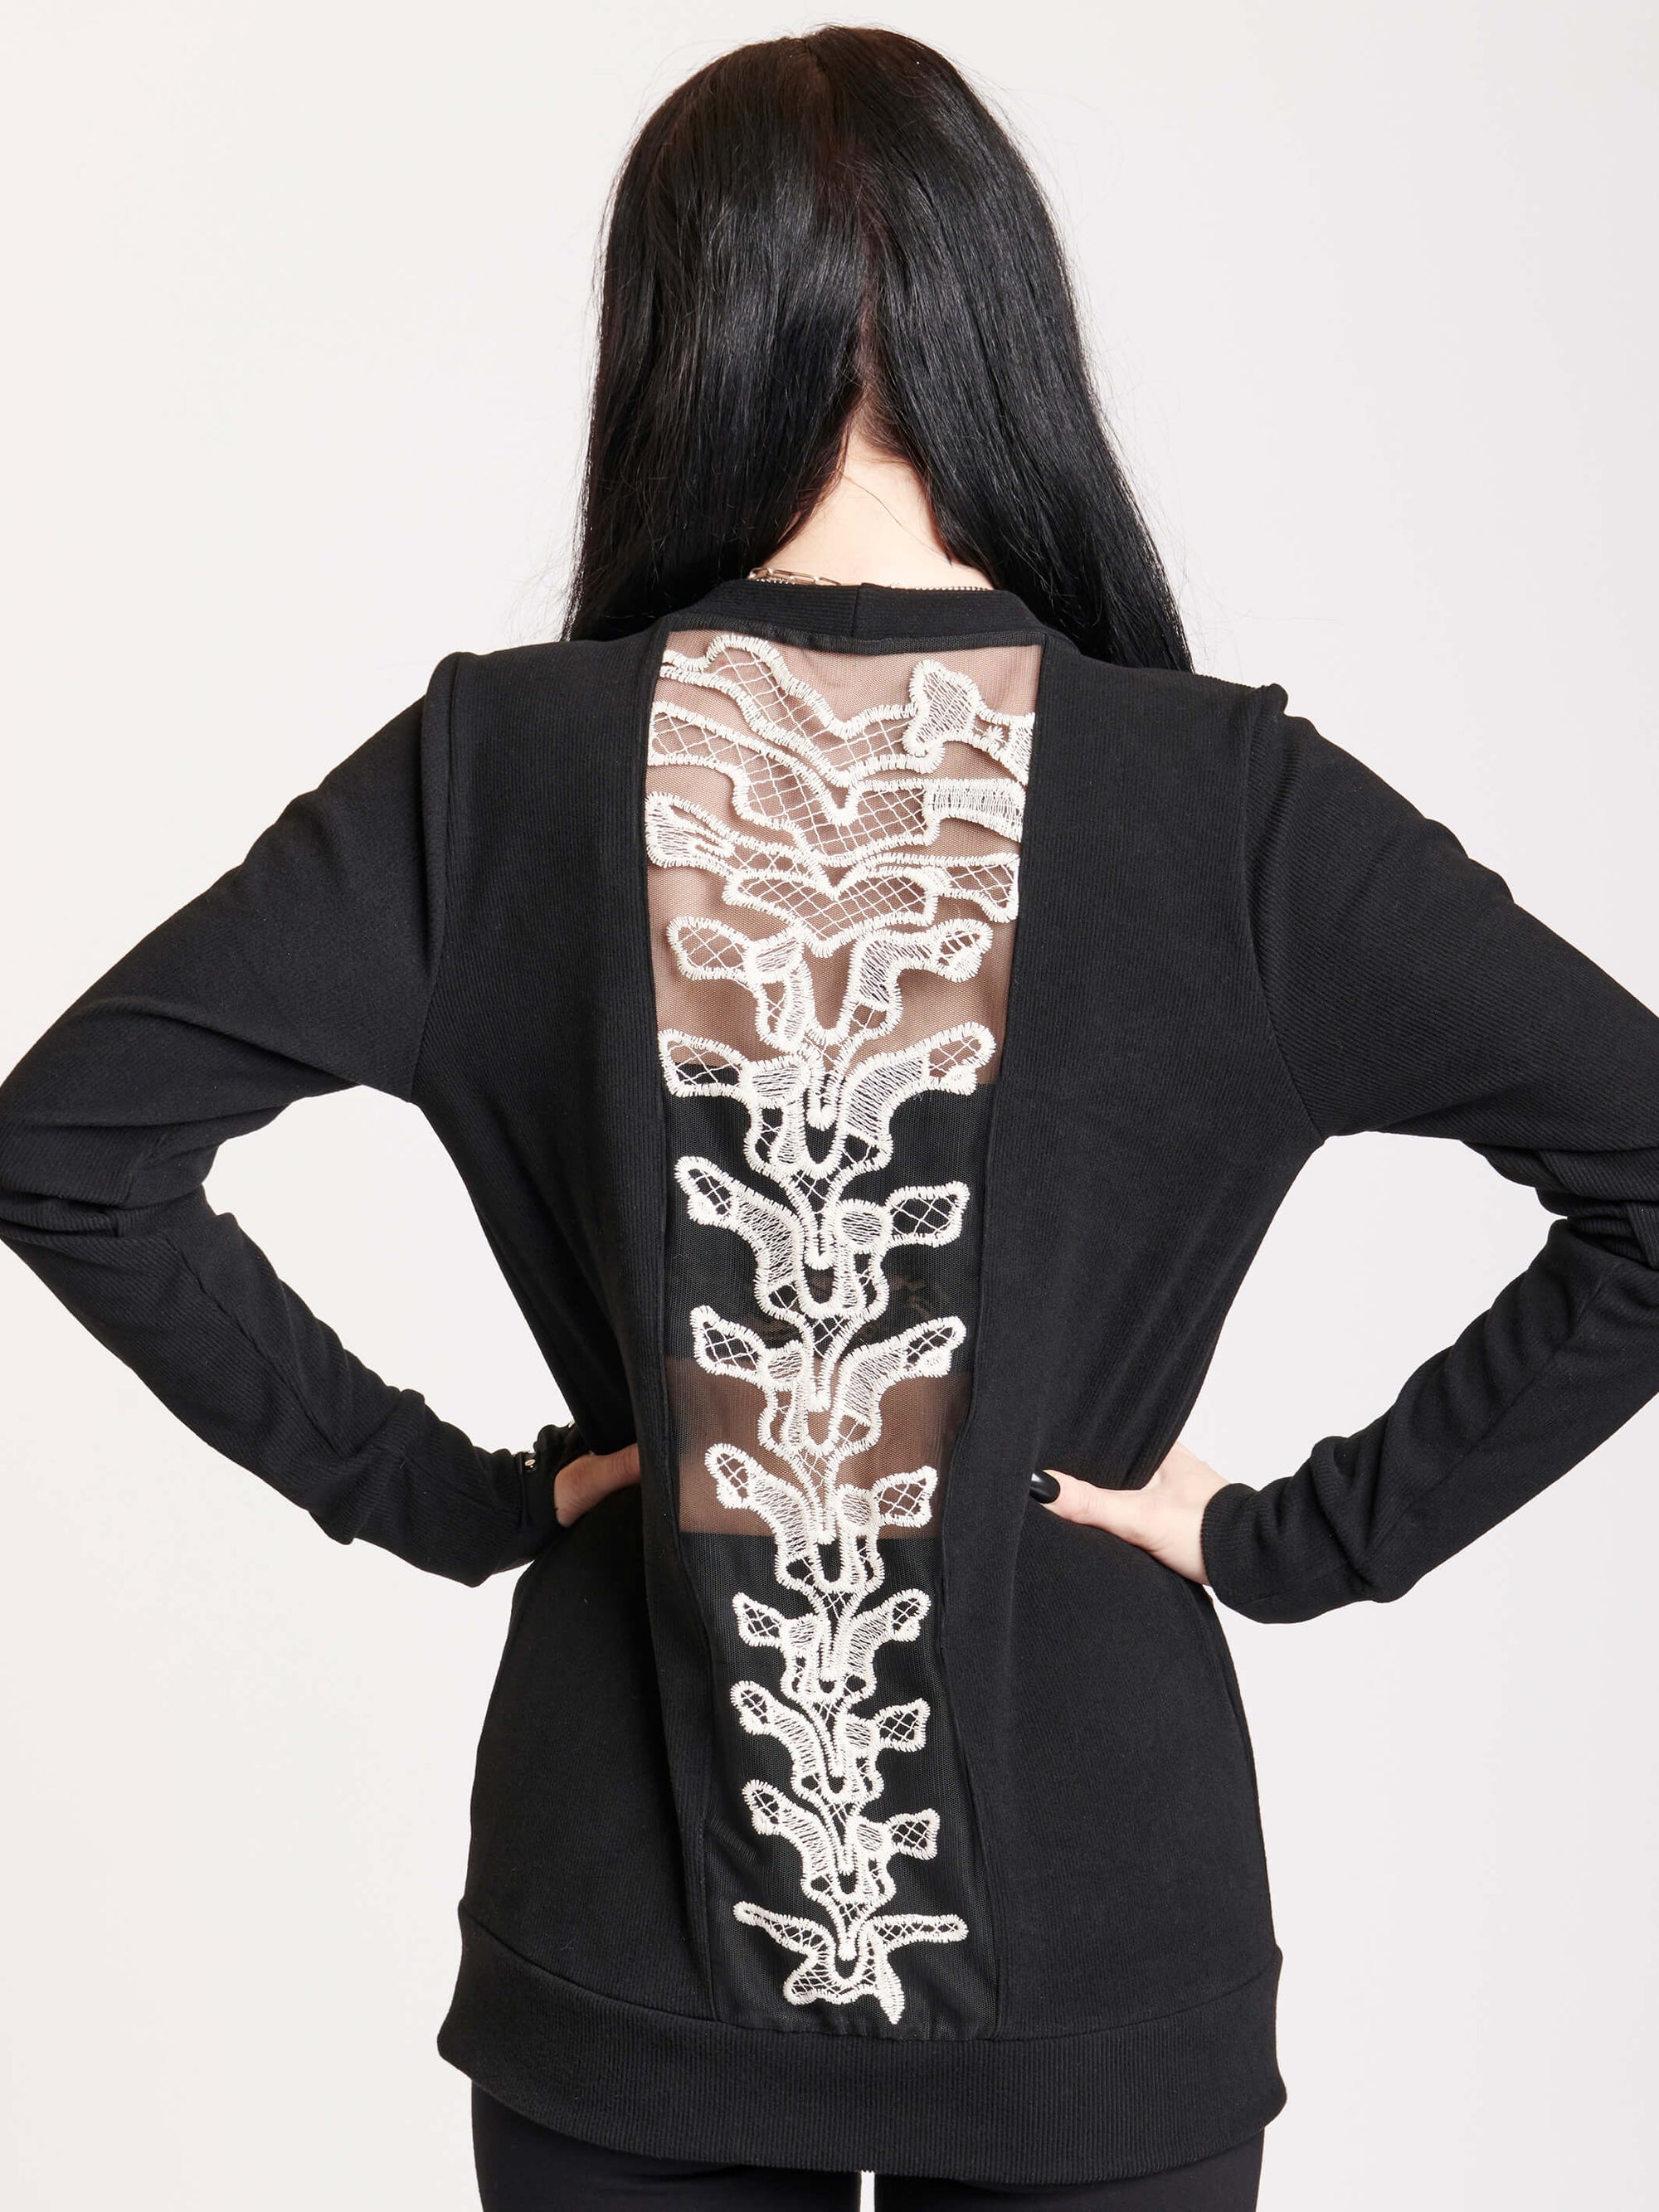 spine back embroidered applique with metal skull buttons